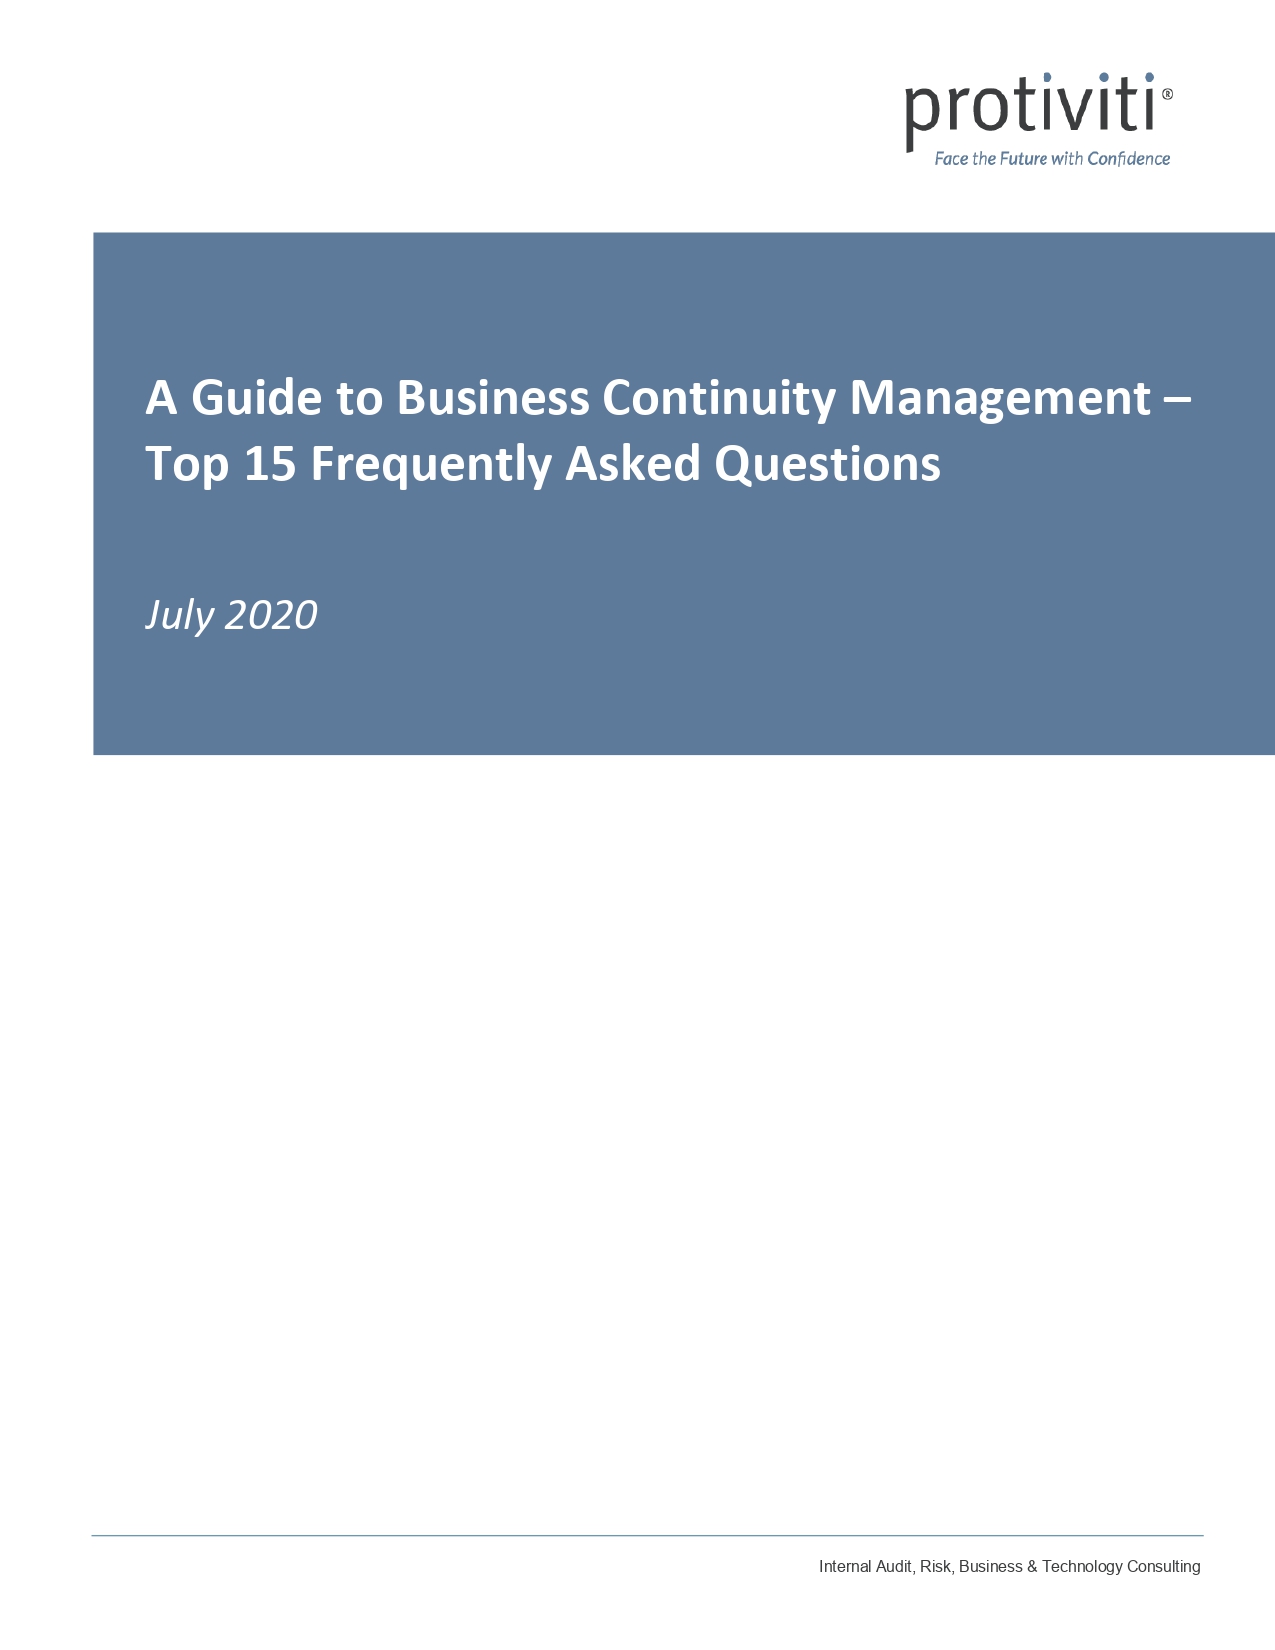 A Guide to Business Continuity Management – Top 15 Frequently Asked Questions (July 2020)